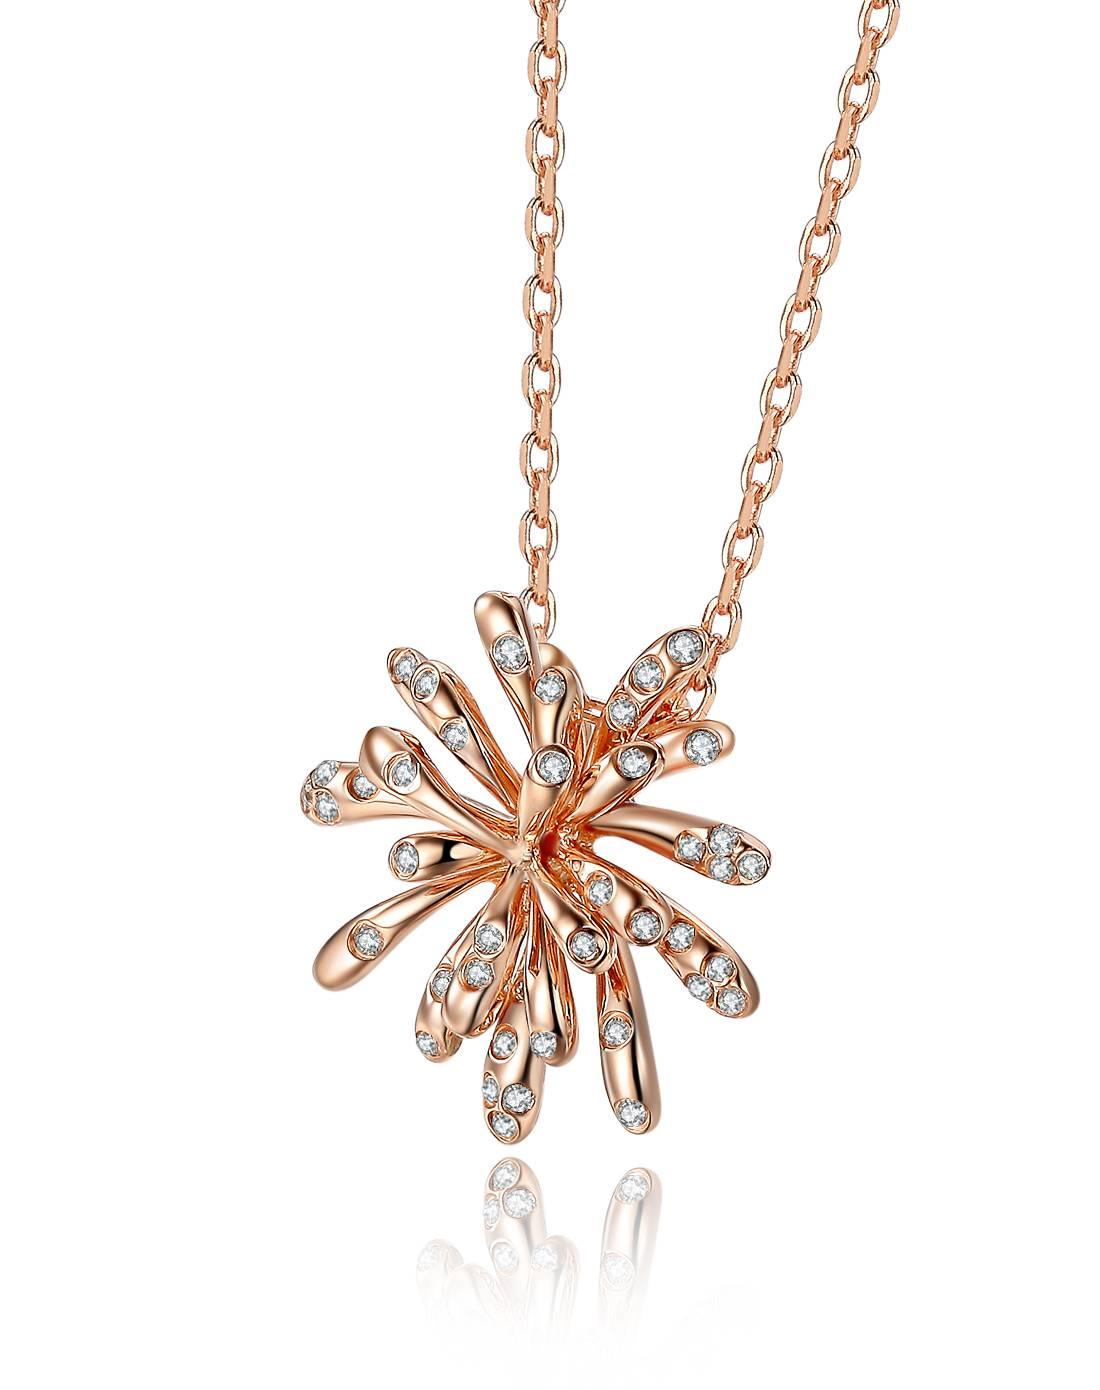 Description:
Celebration pendant with 0.069ct white diamonds, set in 9ct rose gold. Chain length is 18 inches.

Inspiration:
The Celebration is a 9ct capsule collection; over time this collection will develop to make a truly collectable Fei Liu Fine